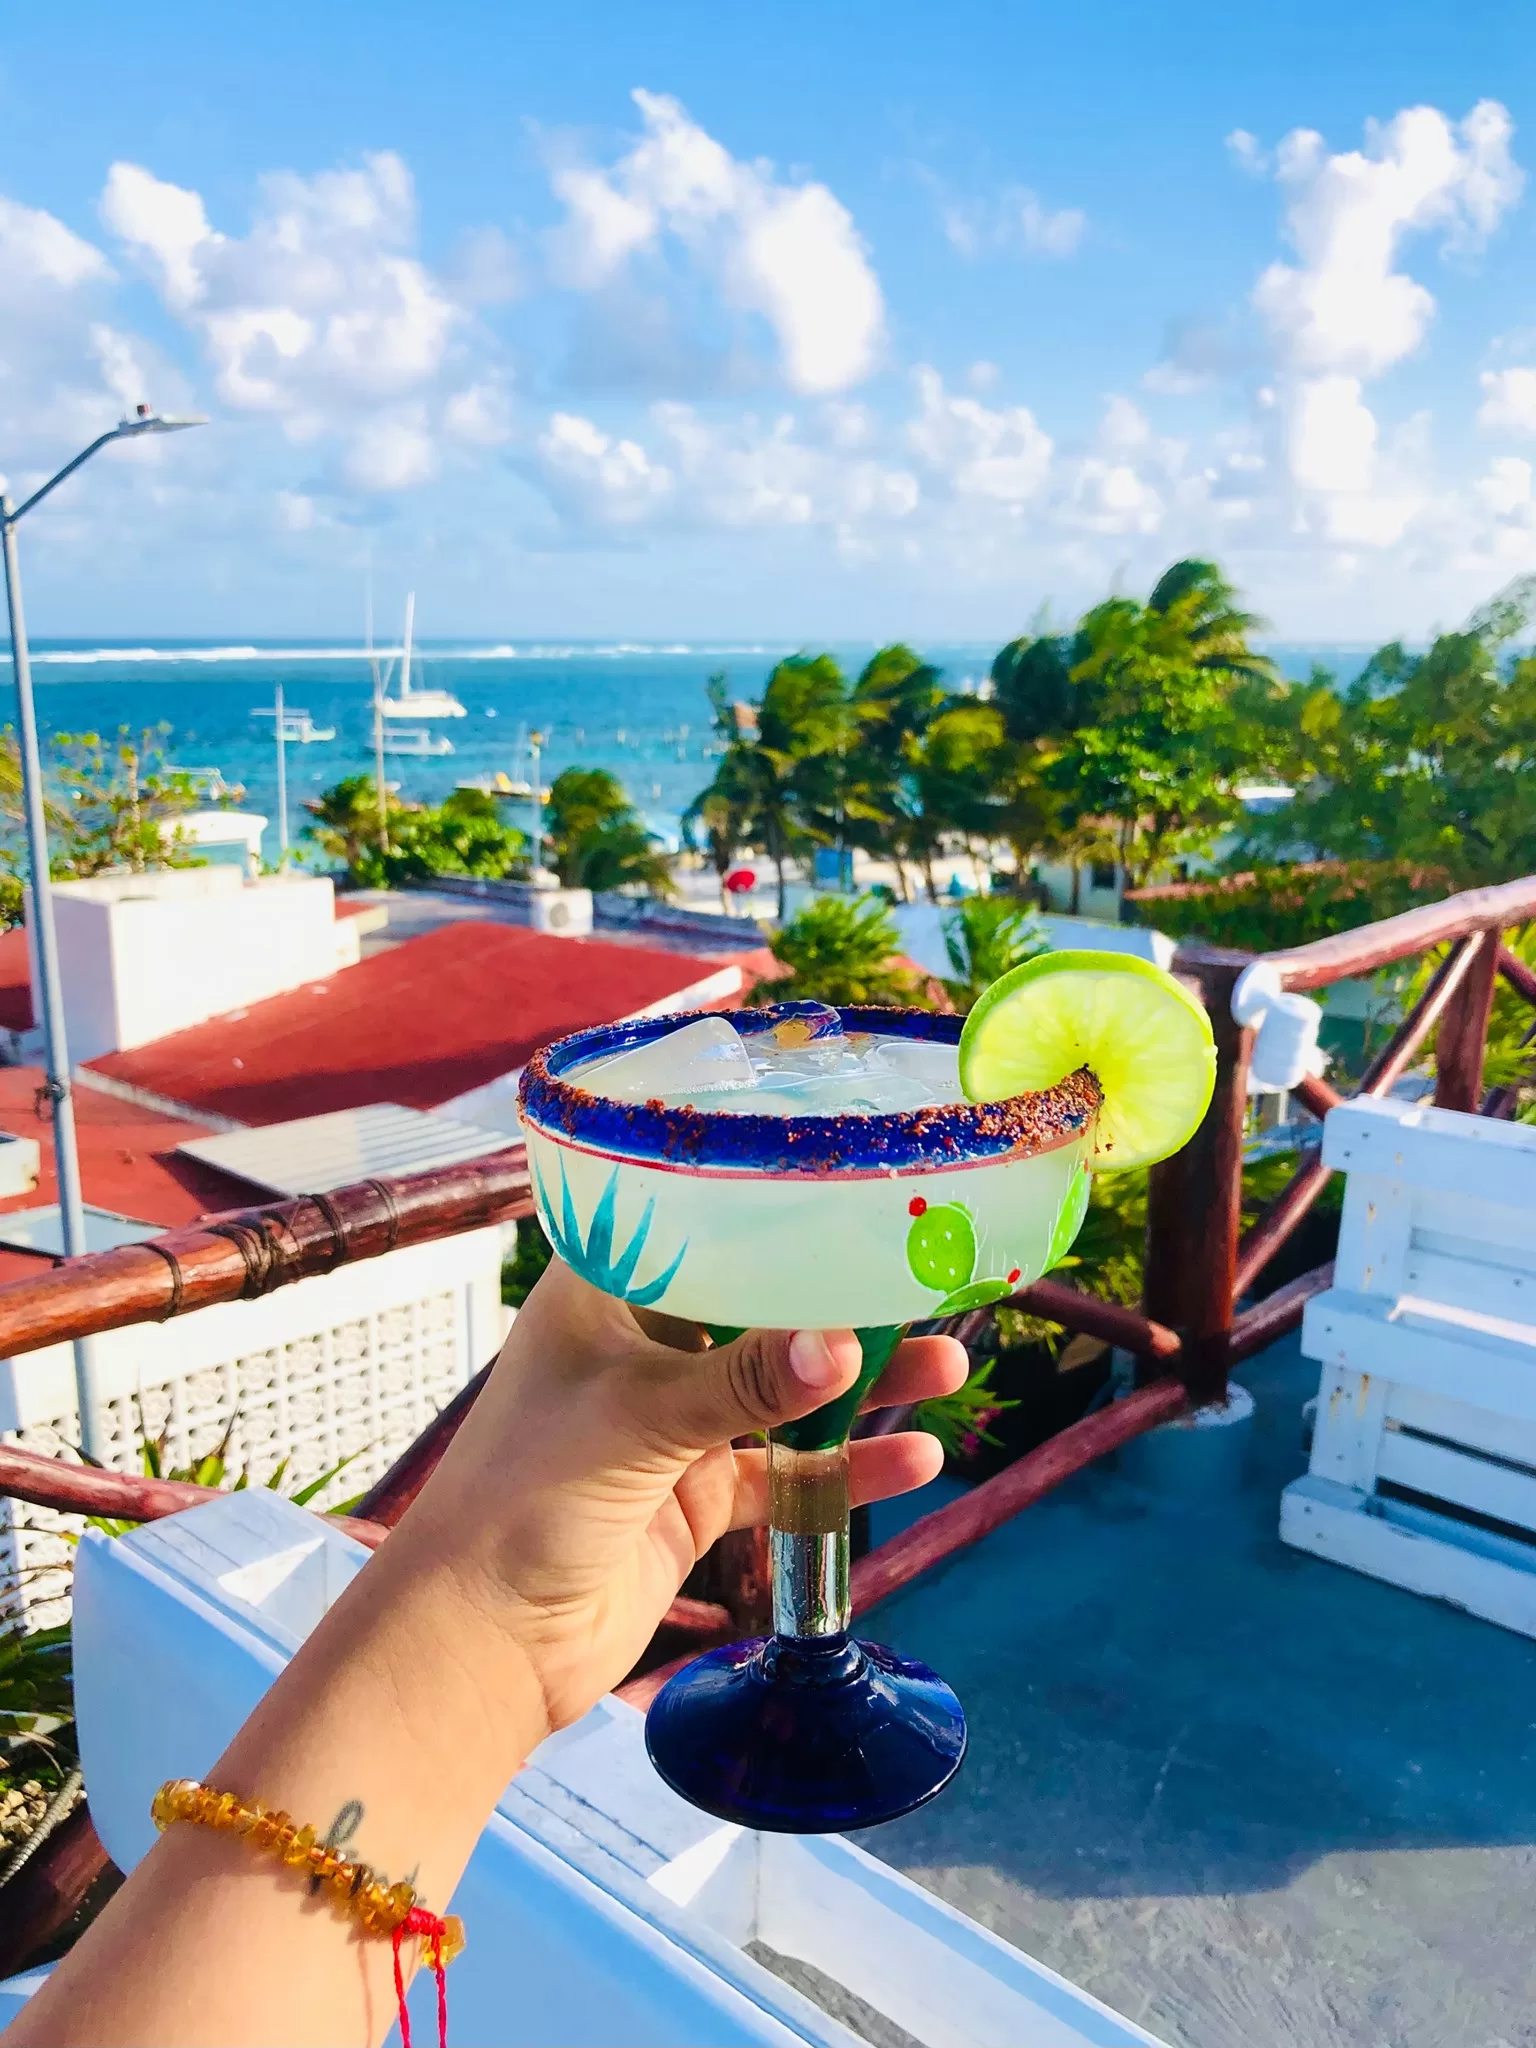 Woman's hand holding a margarita glass with buildings, palm trees, and the ocean in the background.